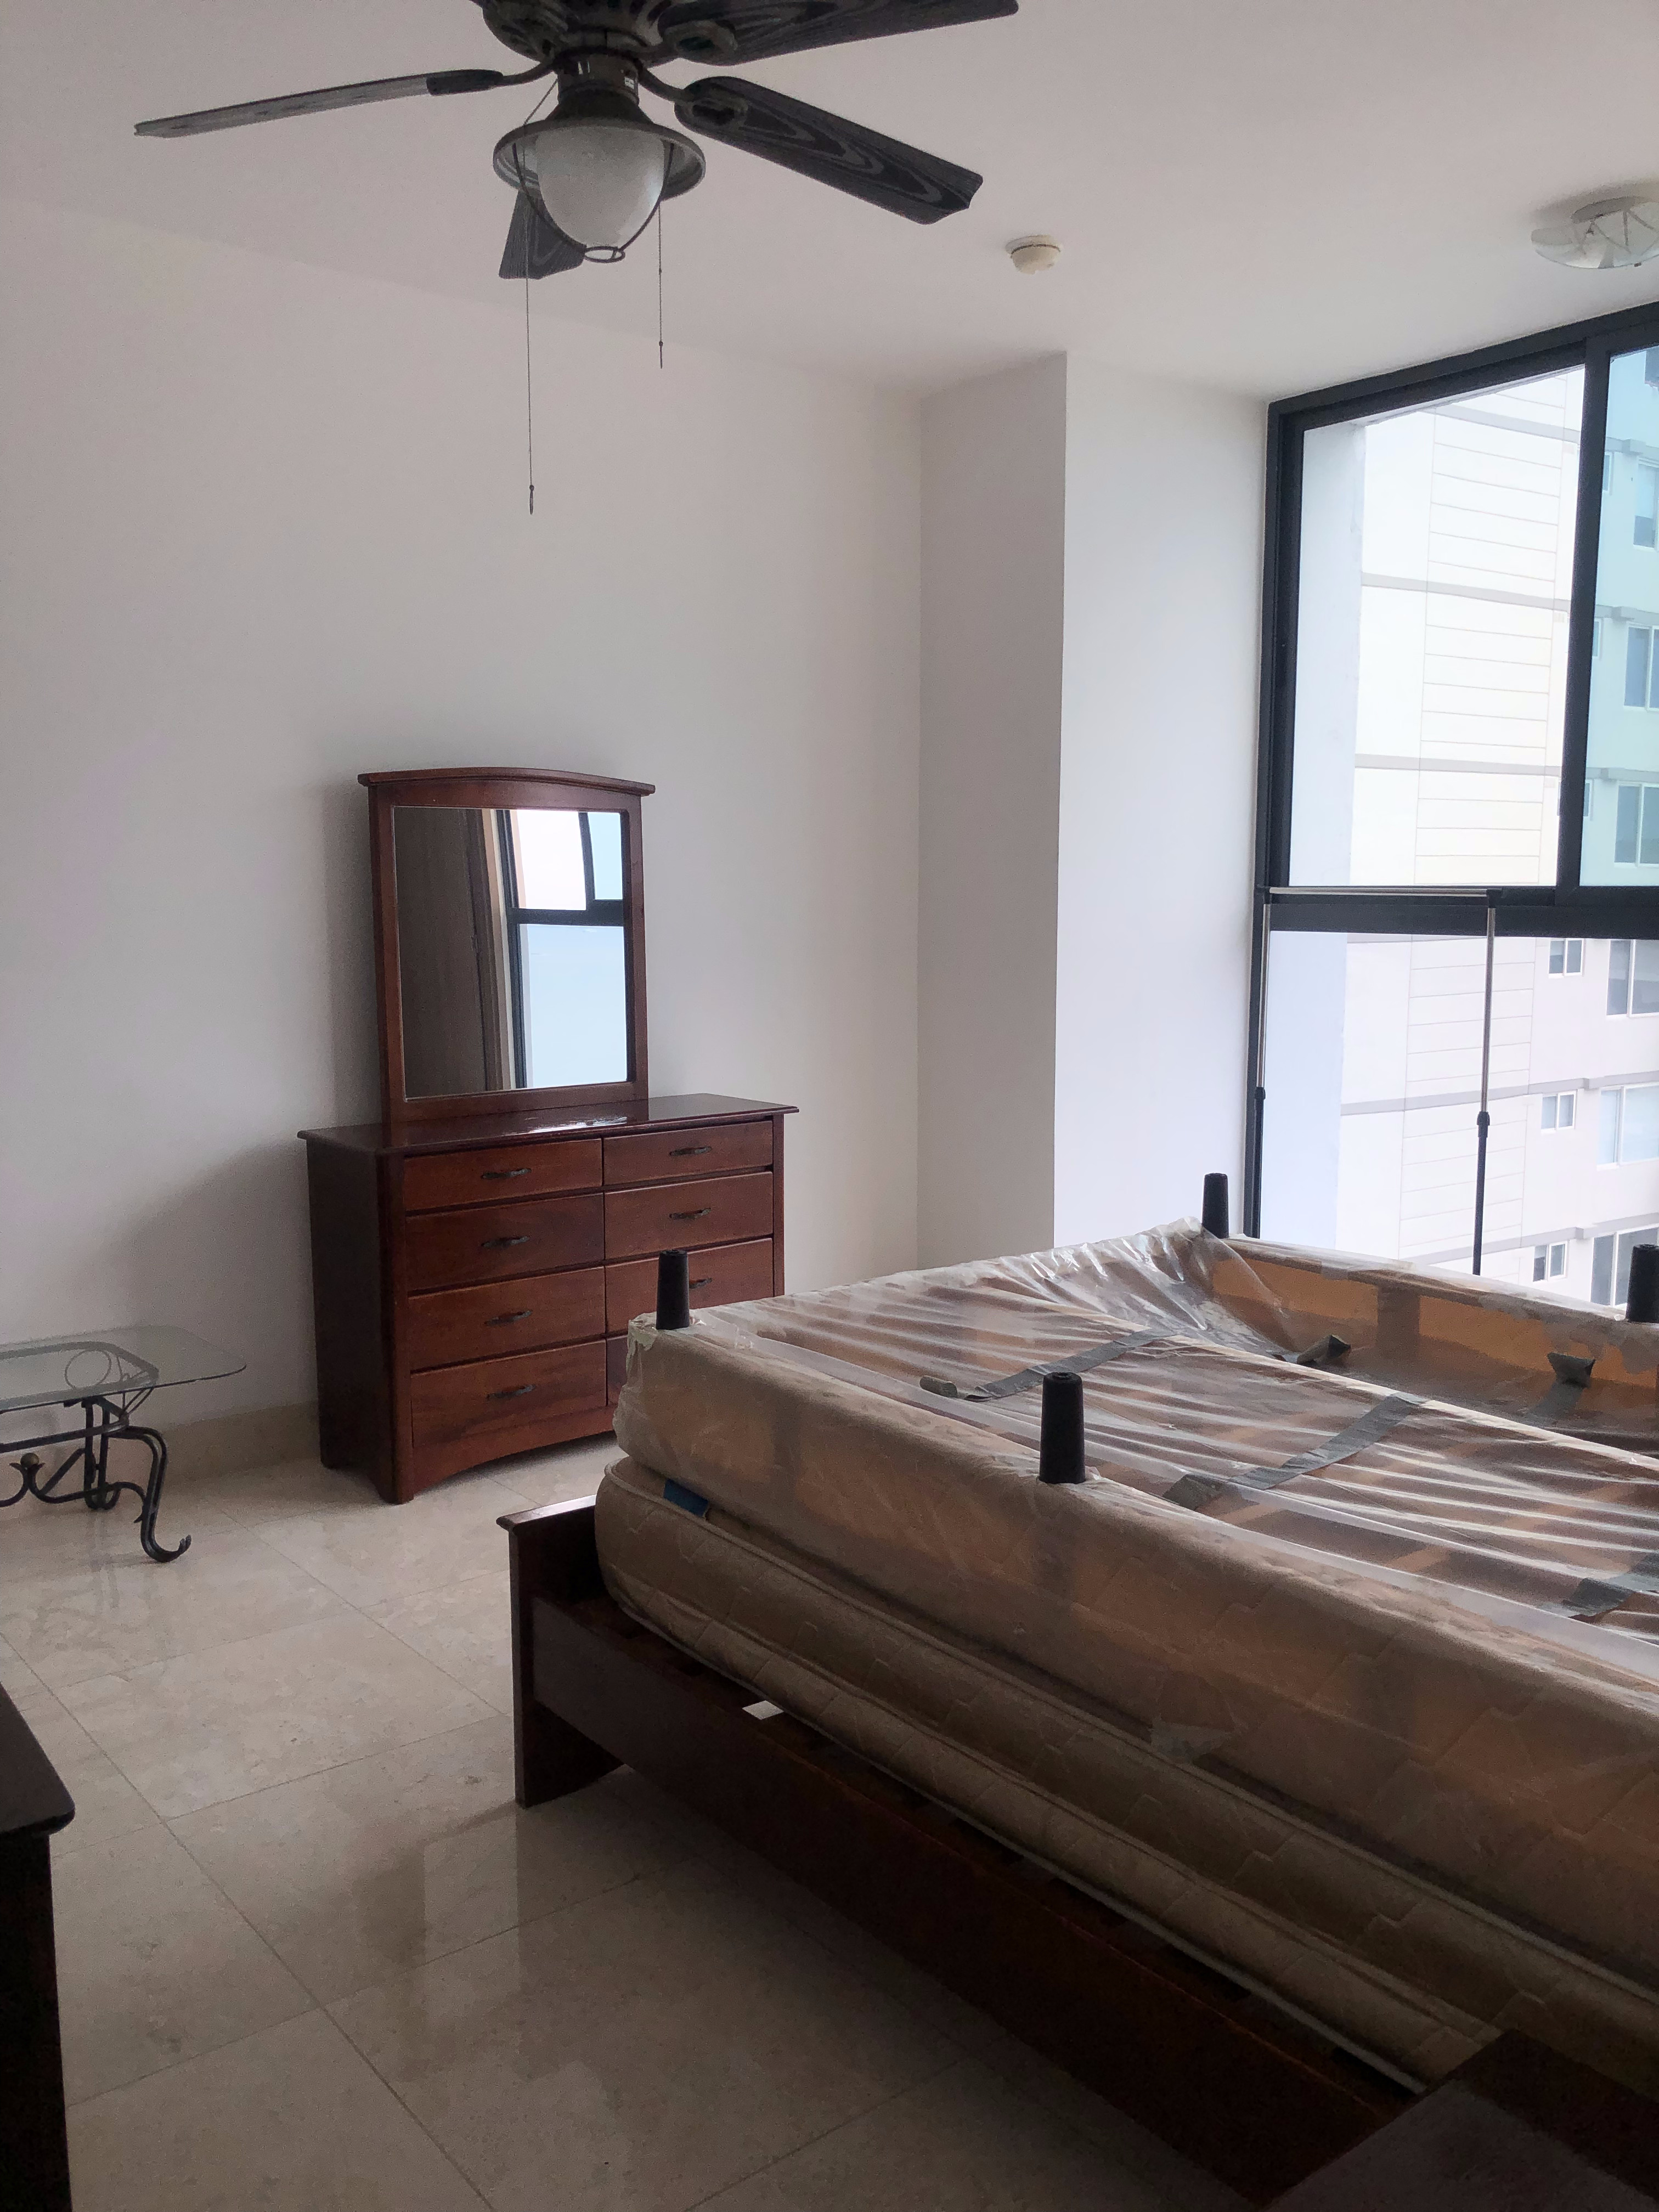 PH Deluxe 3-BR Apartment in Paitilla with Service Quarters - PLS-19916 | Panama's Elite Listings Beyond MLS